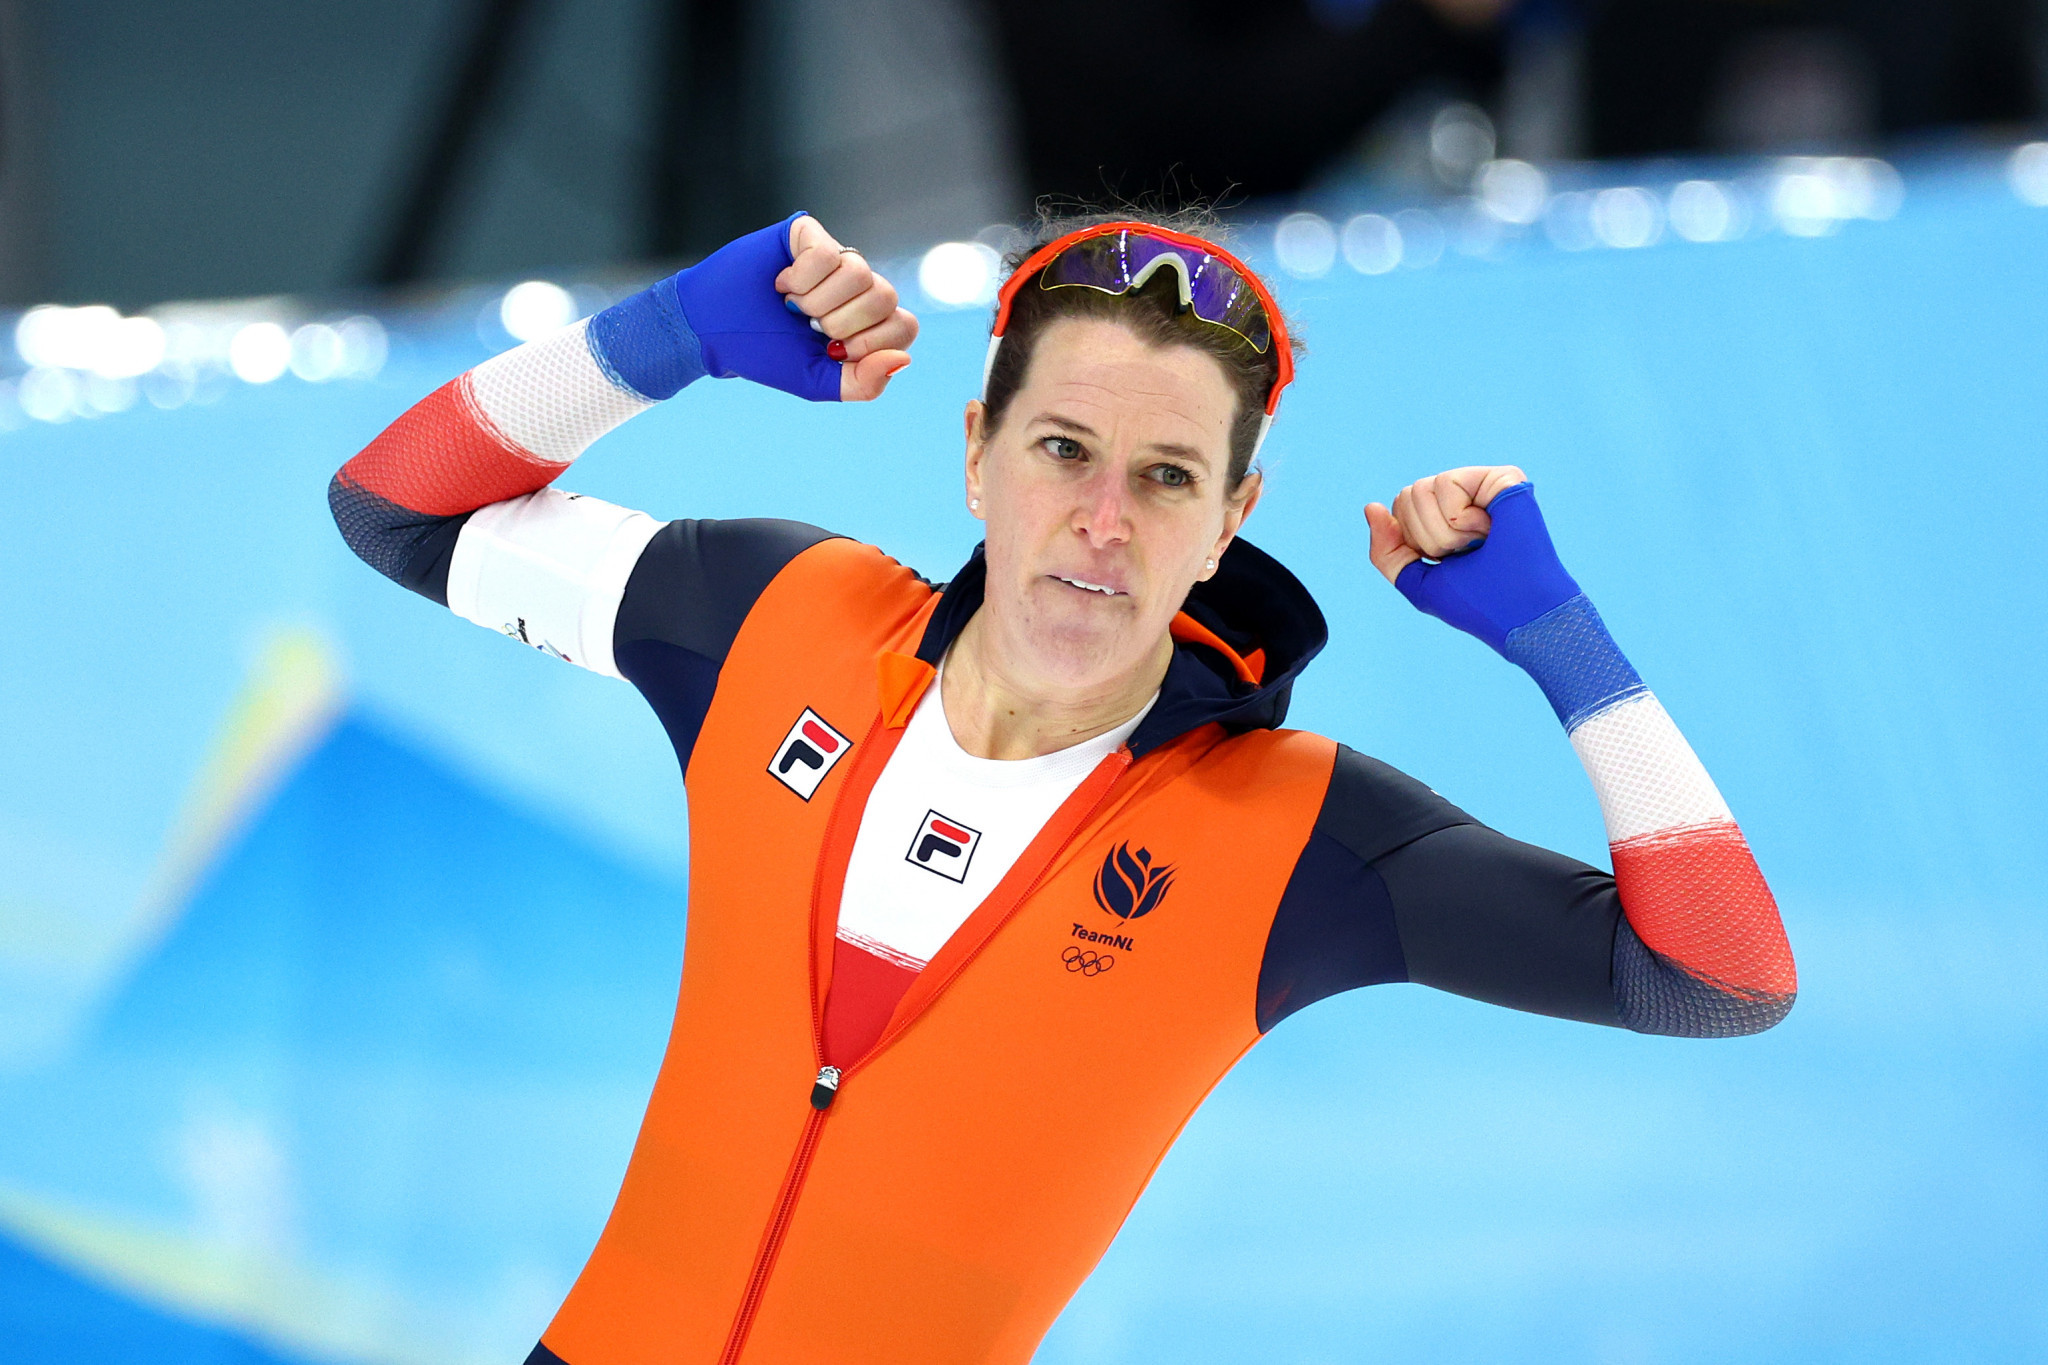 Record-breaking Wüst wins individual gold medal at fifth Olympics in a row